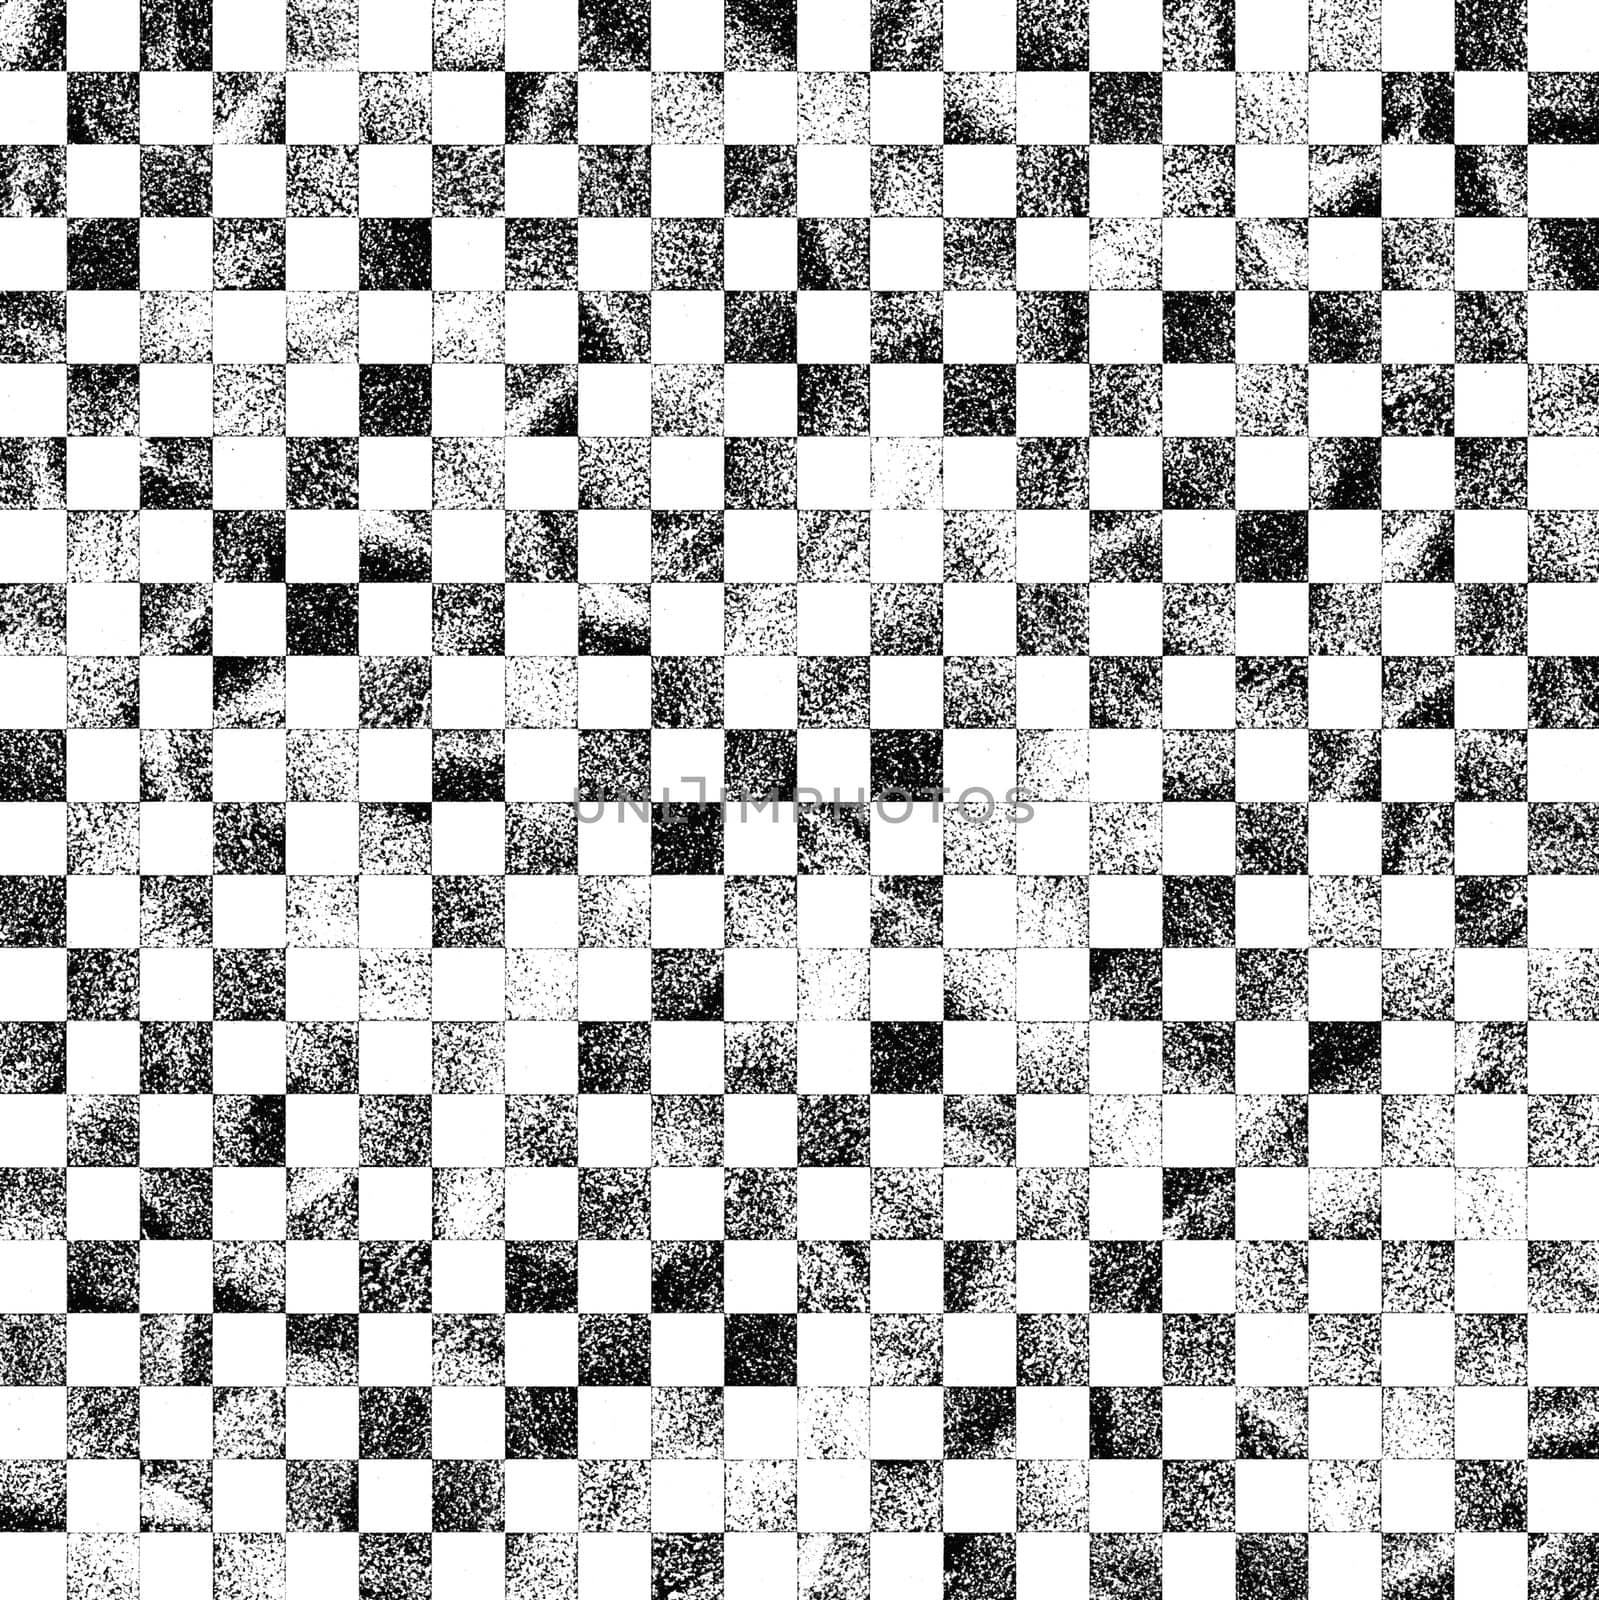 Monochrome background with a grunge chess pattern by Mastak80